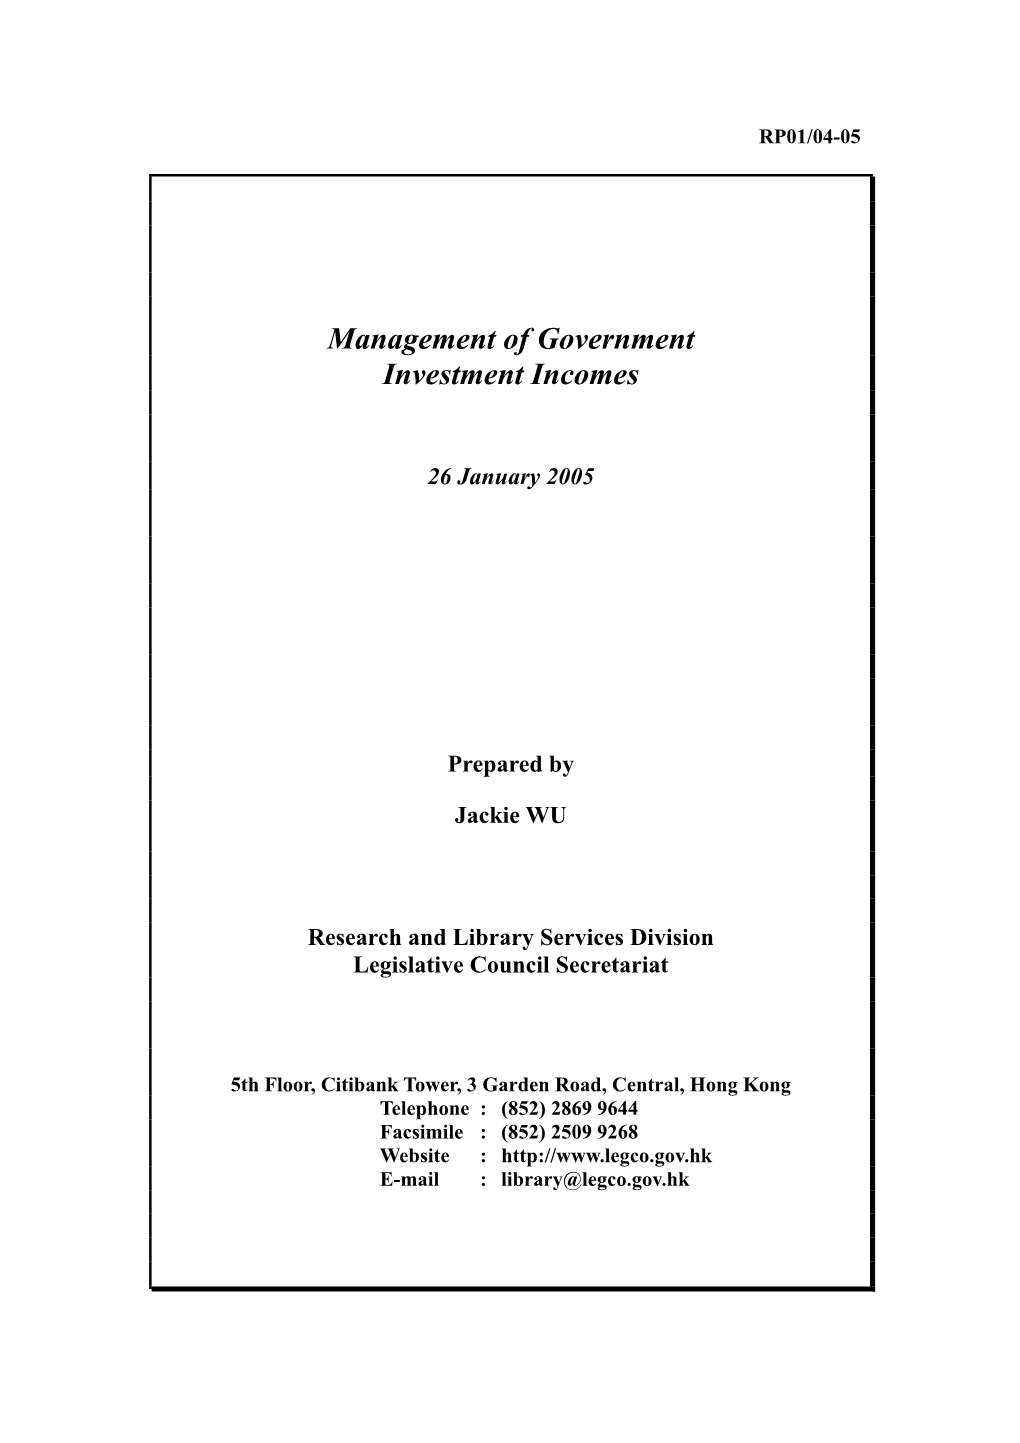 Research Report on "Management of Government Investment Incomes"